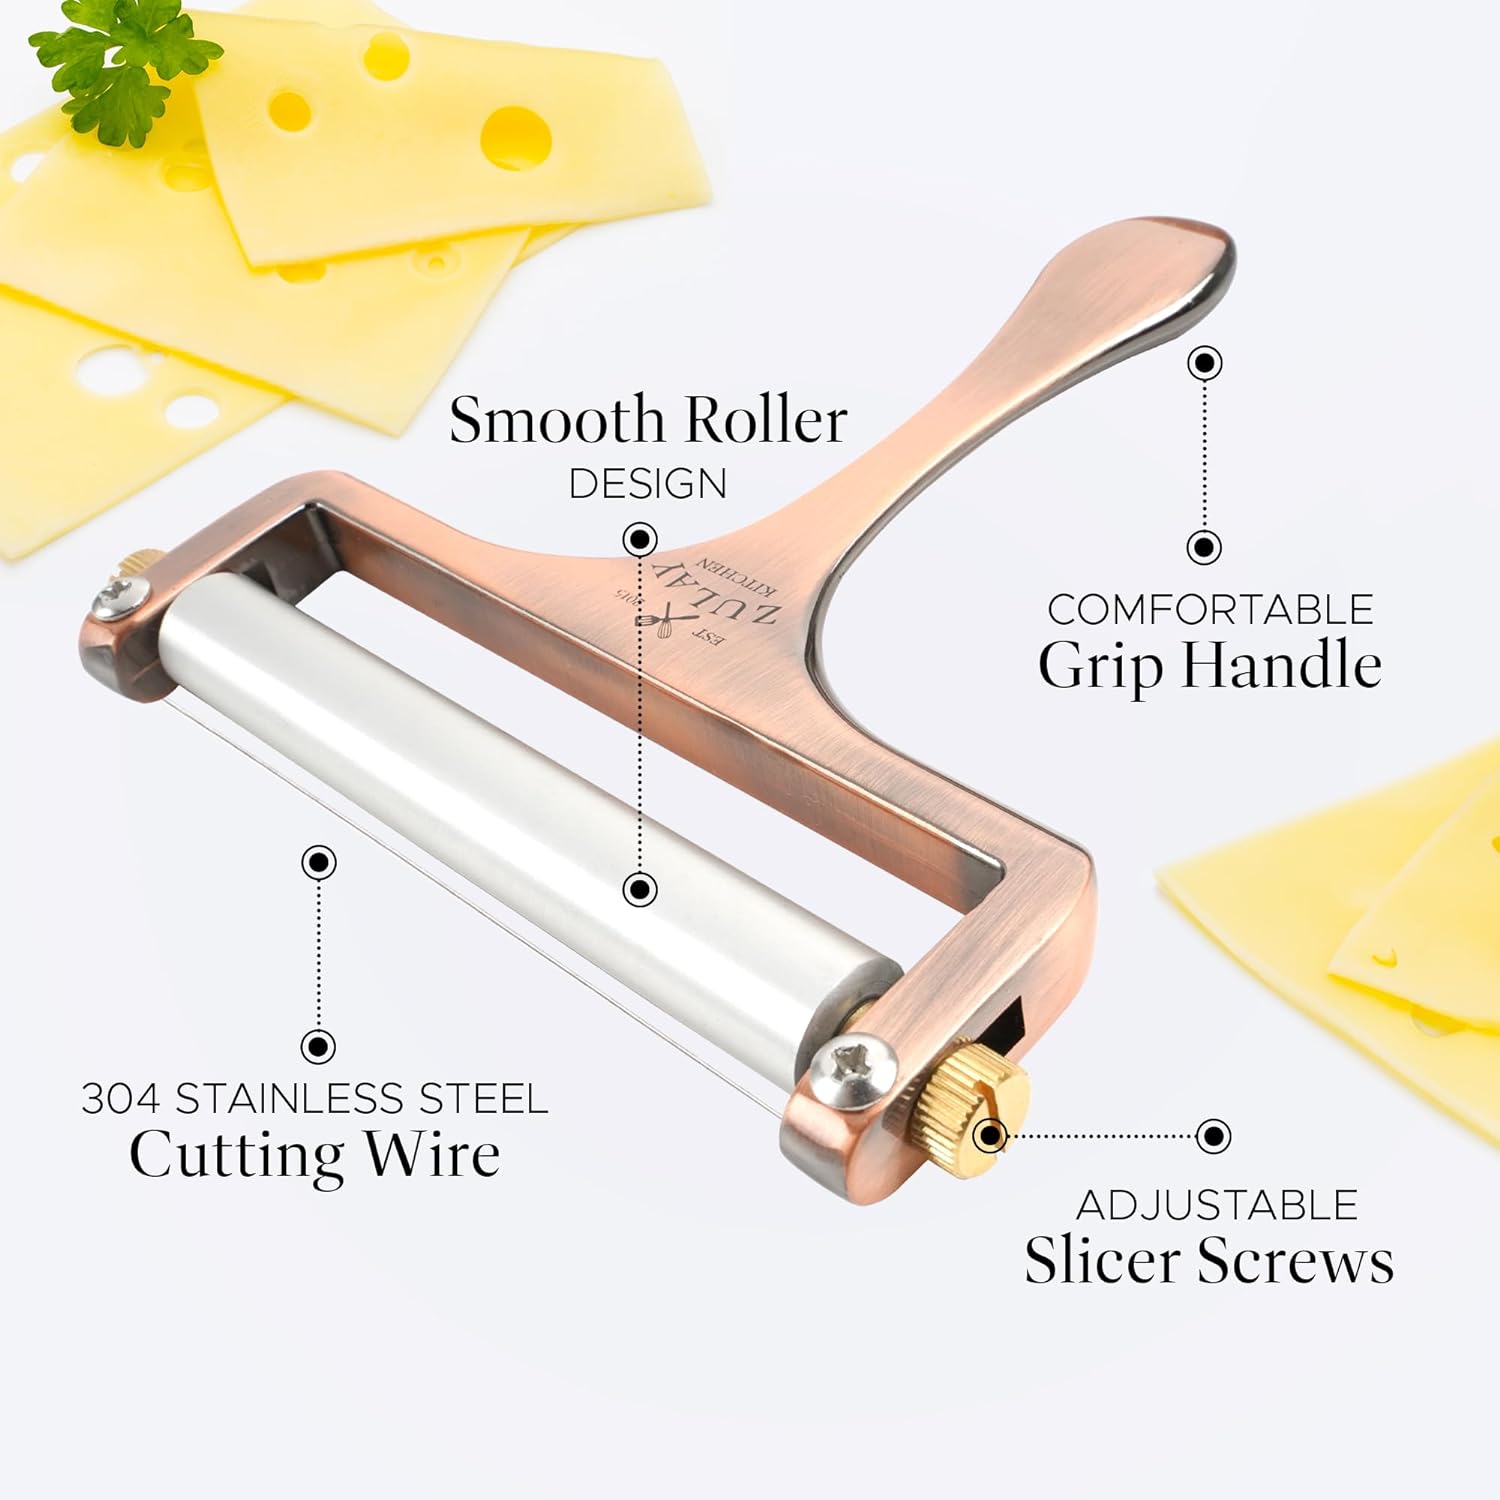 Cheese Slicer Made of Stainless Steel with Aluminum Handle Silver